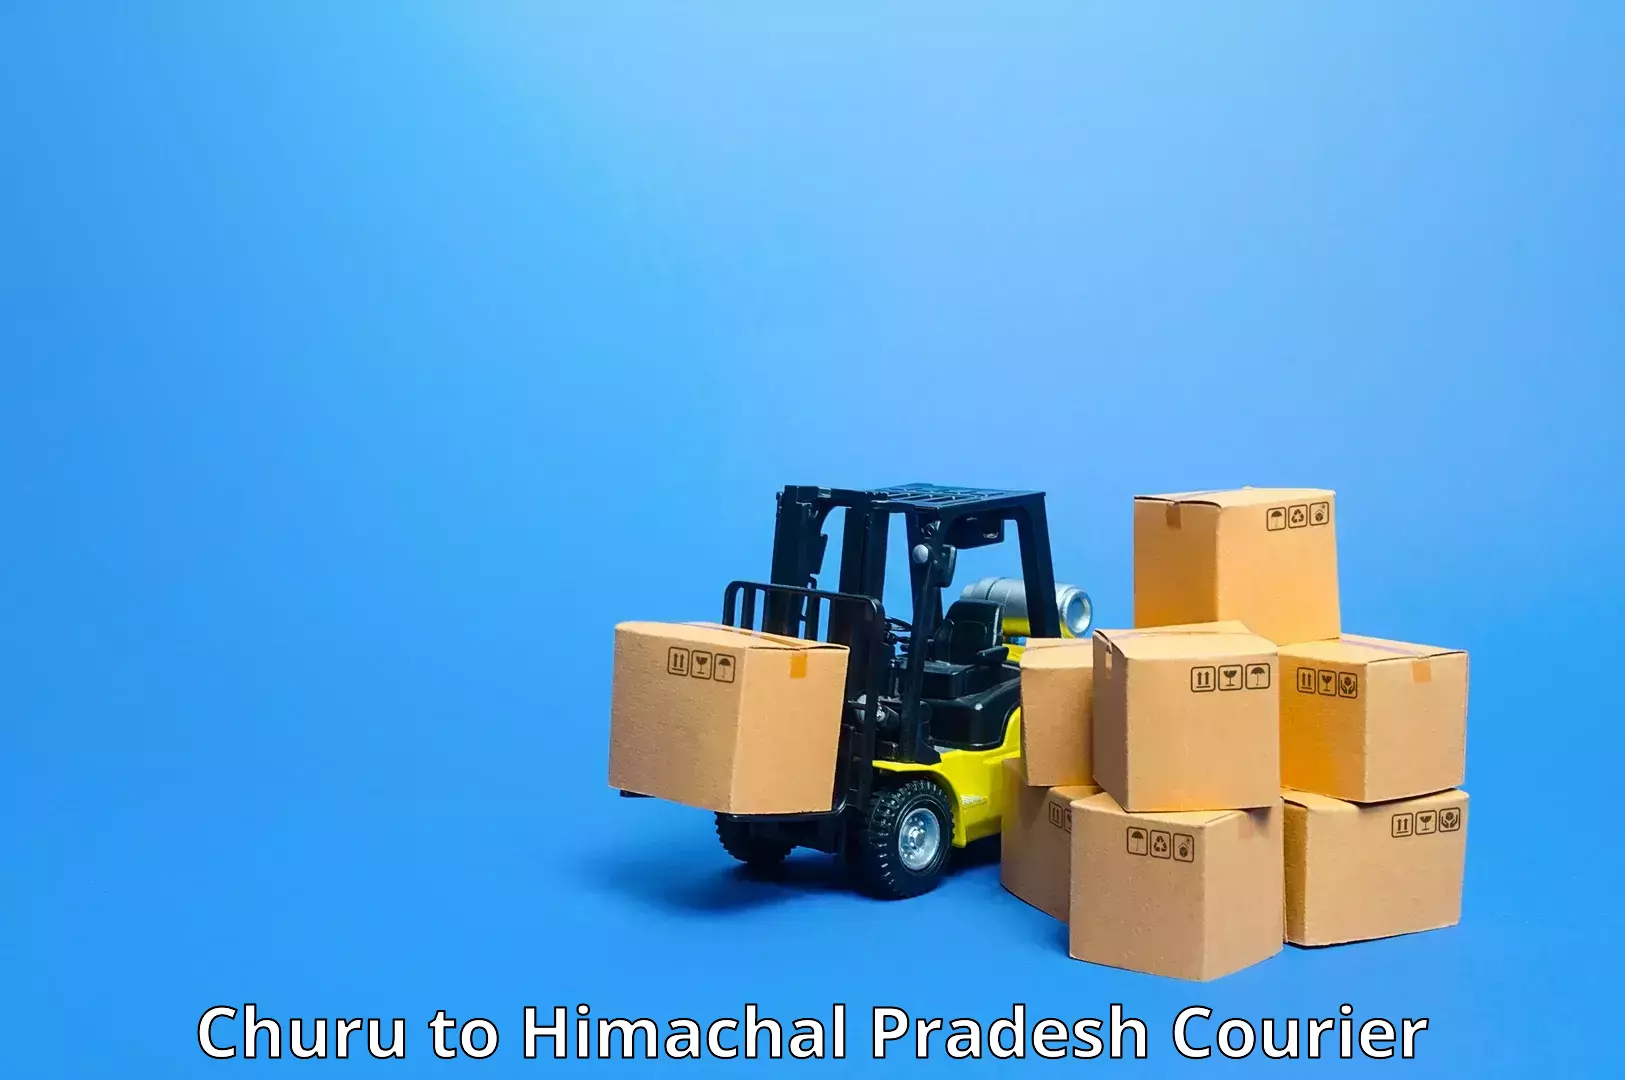 Efficient package consolidation in Churu to Himachal Pradesh